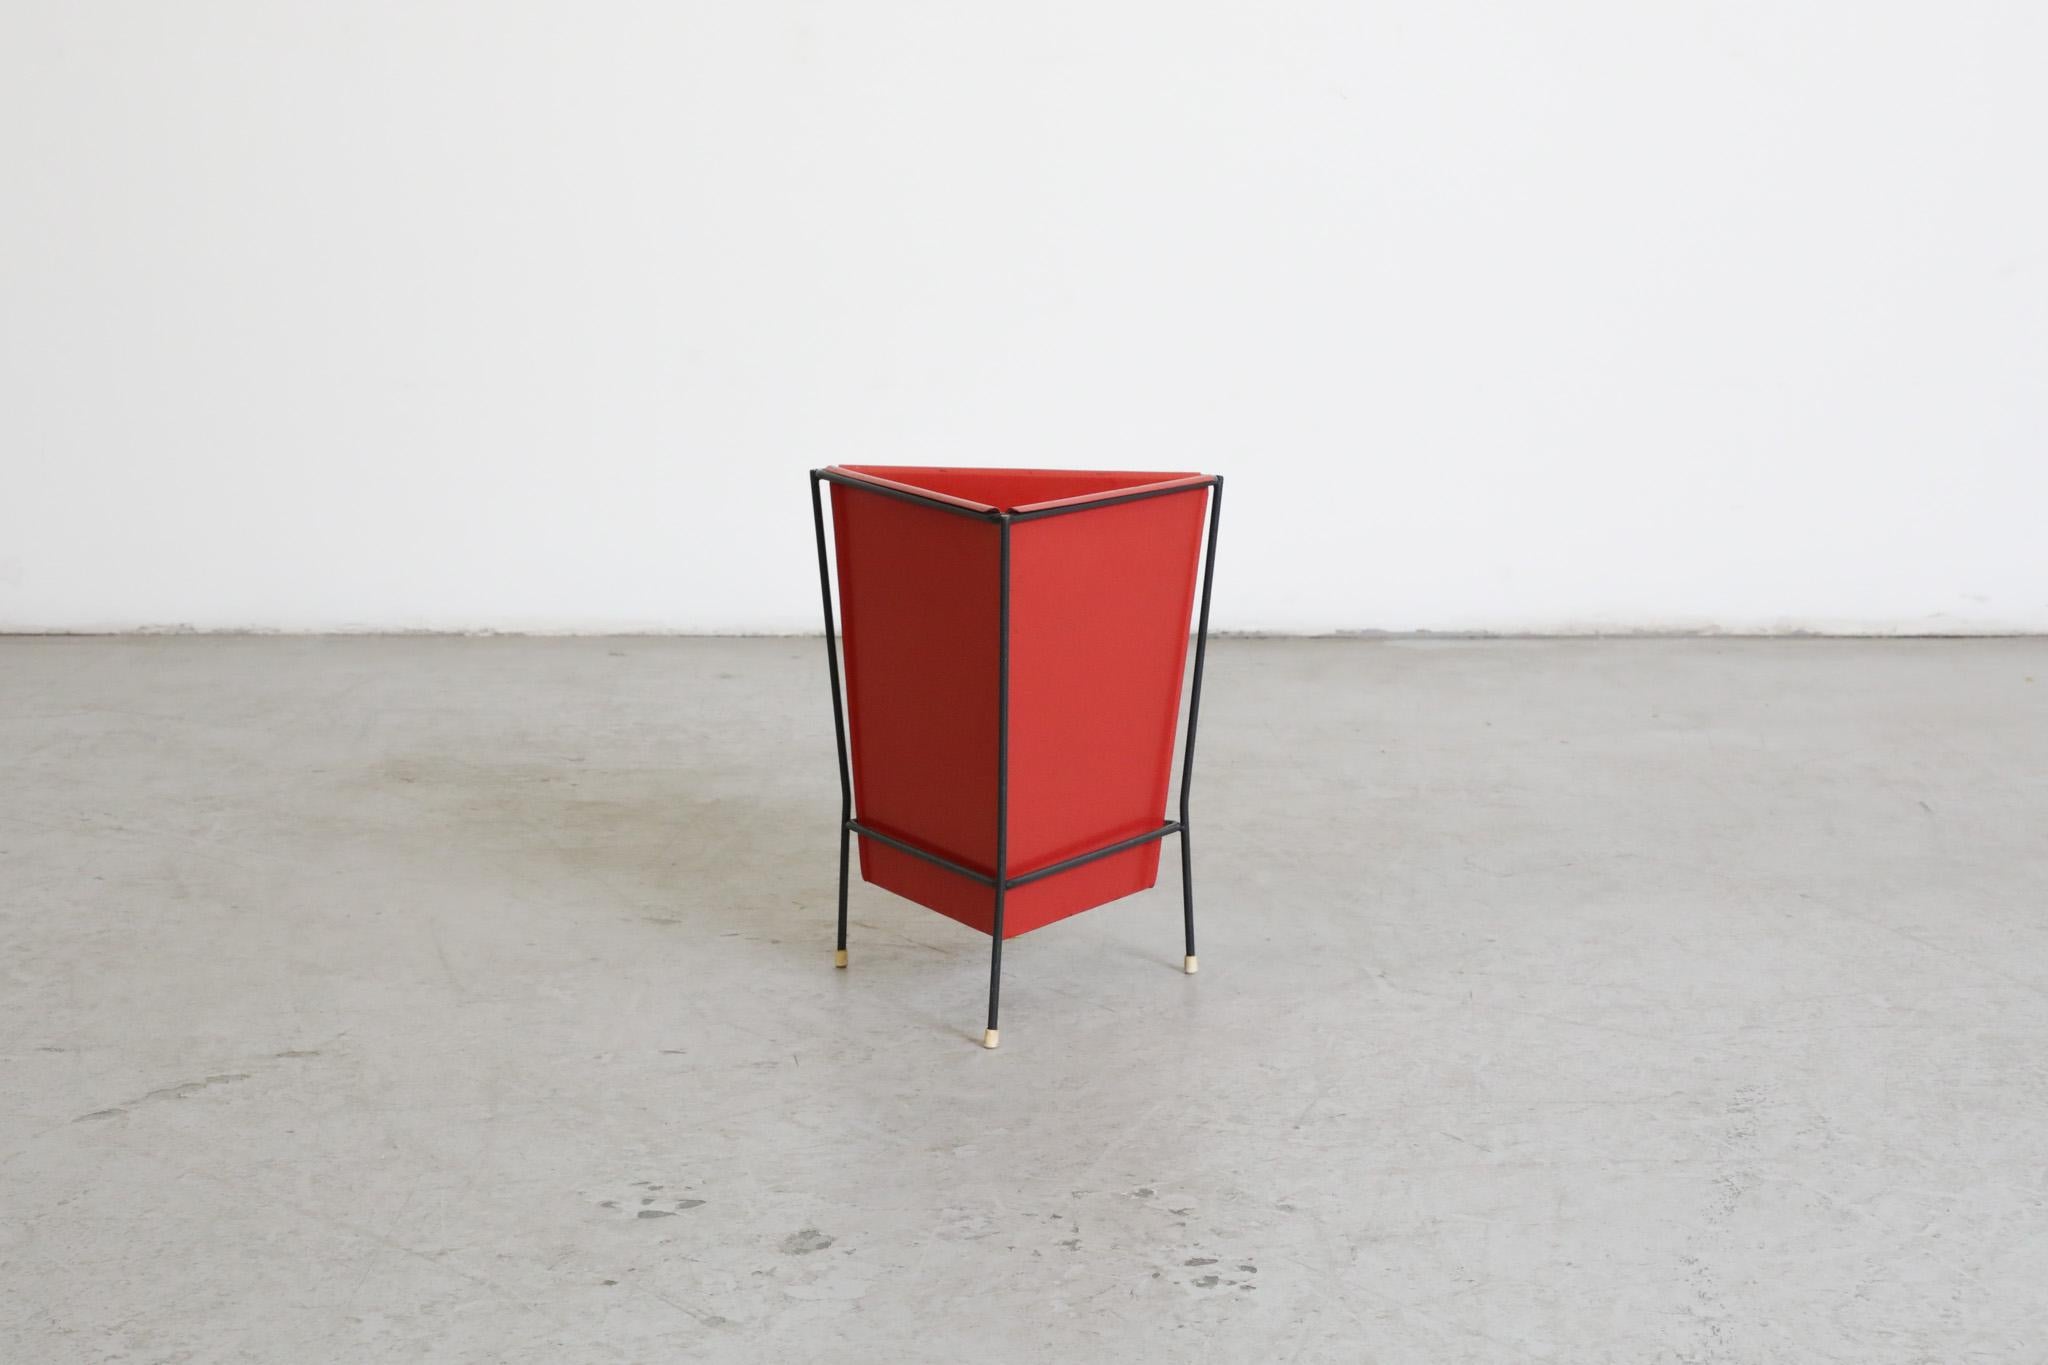 Dutch, Mid-Century, red enameled metal triangle bin with black frame by Dutch post-war furniture and home goods manufacturer Pilastro. Produced in the 1950's and in original condition with visible wear, including some paint loss and discoloration on